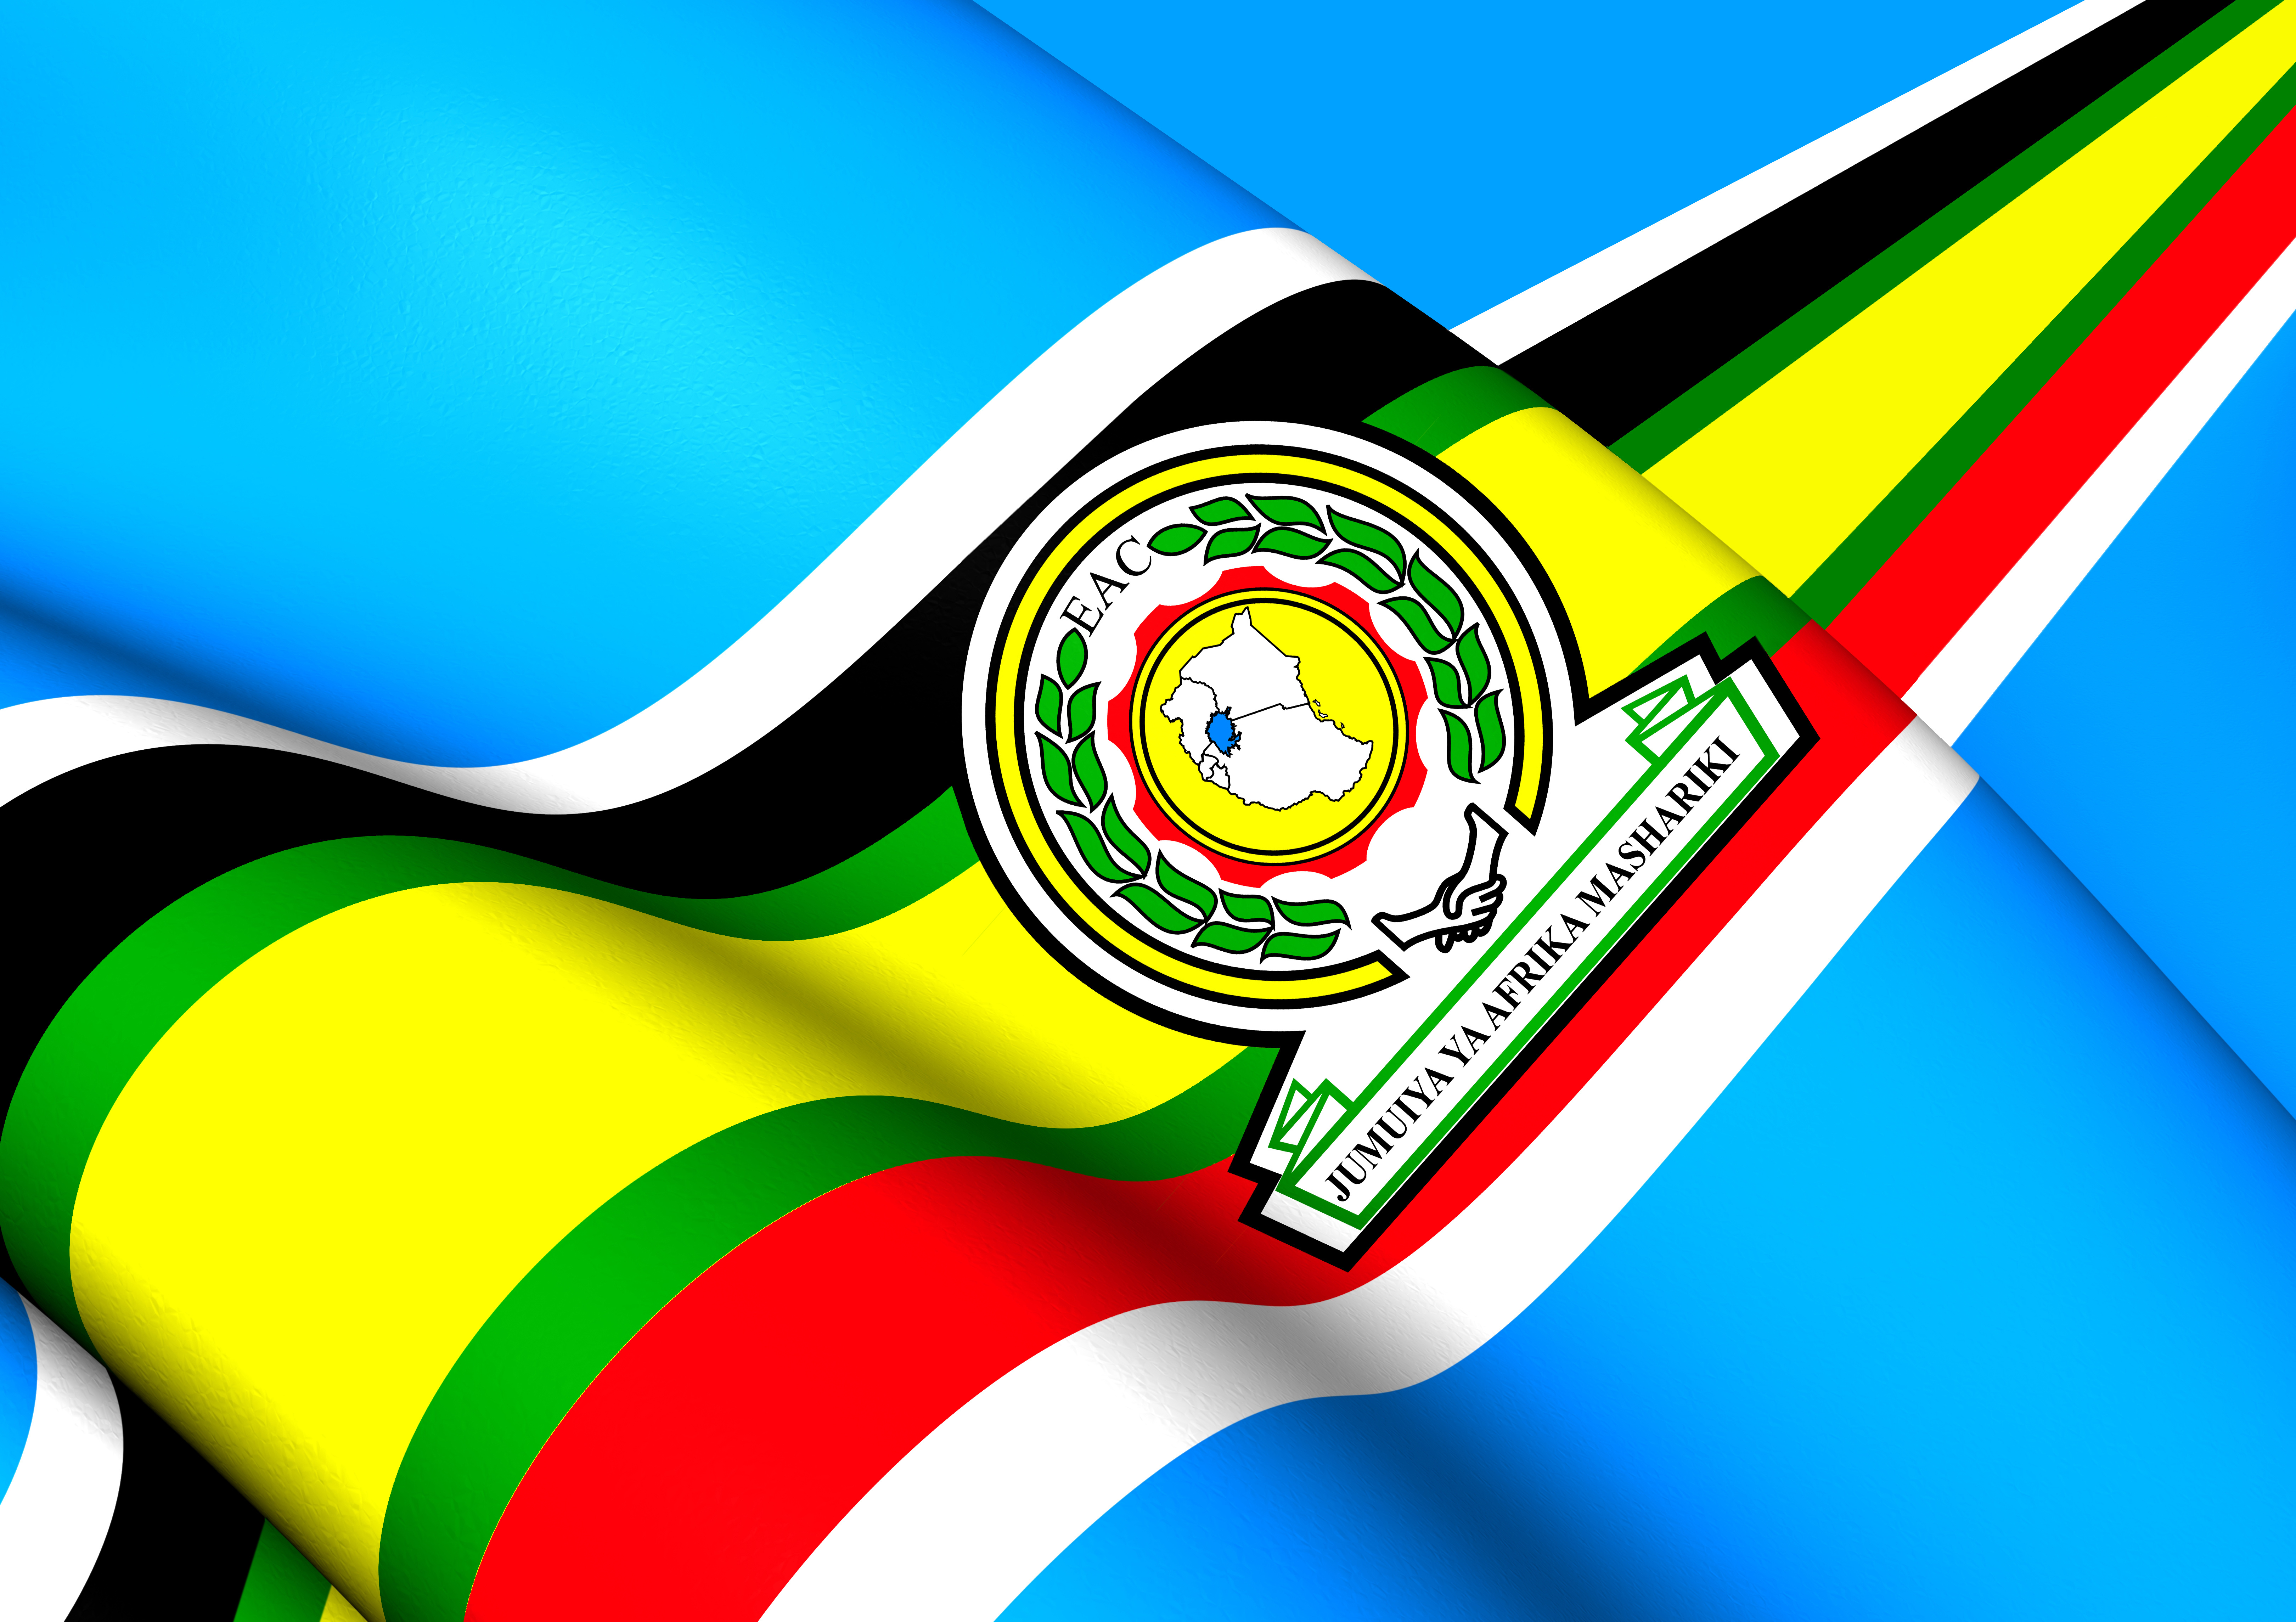 East African Legislative Assembly: choose able and experienced Pan-Africanists